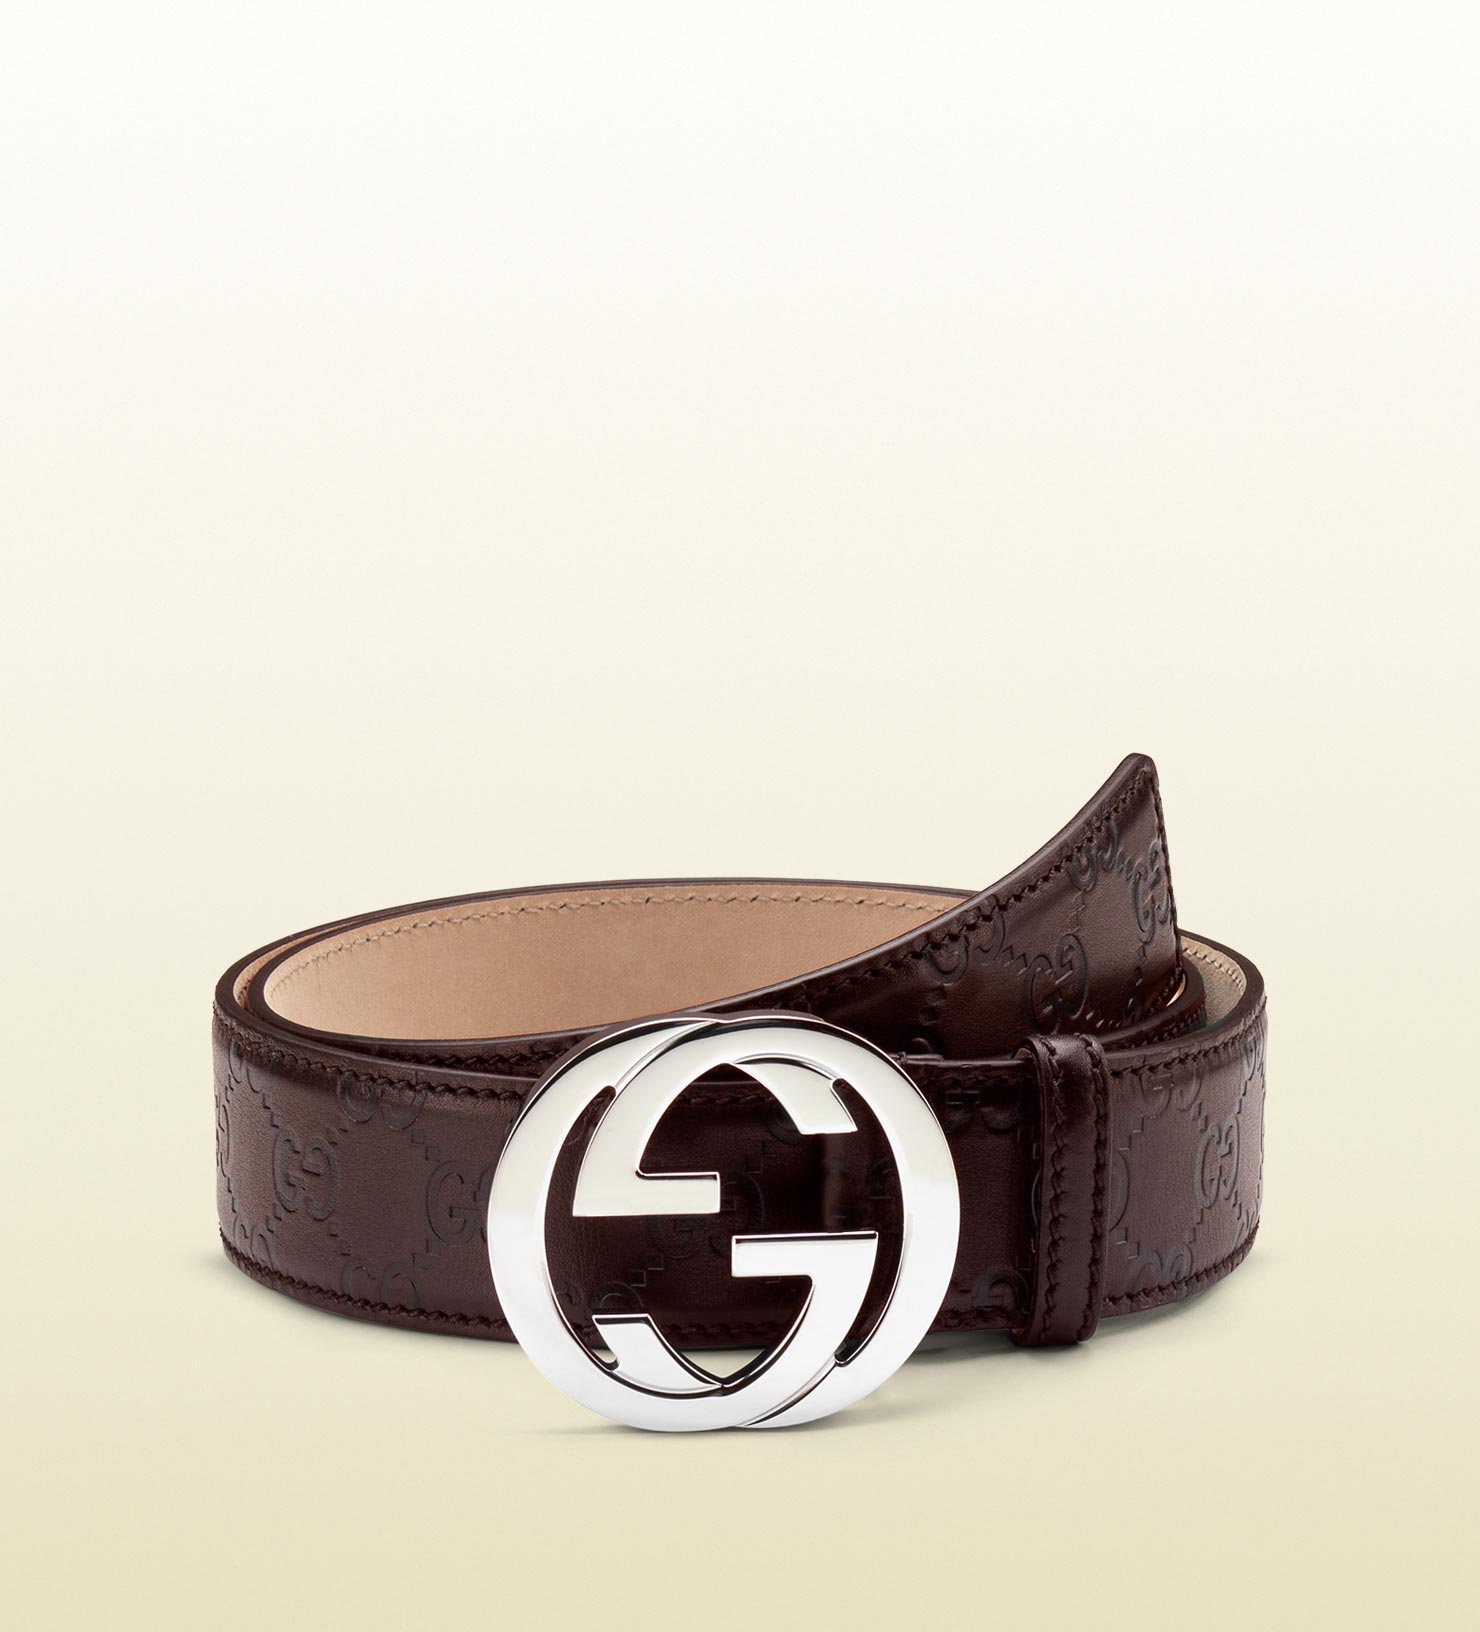 Gucci Ssima Leather Belt With Interlocking G Buckle in Brown for Men - Lyst